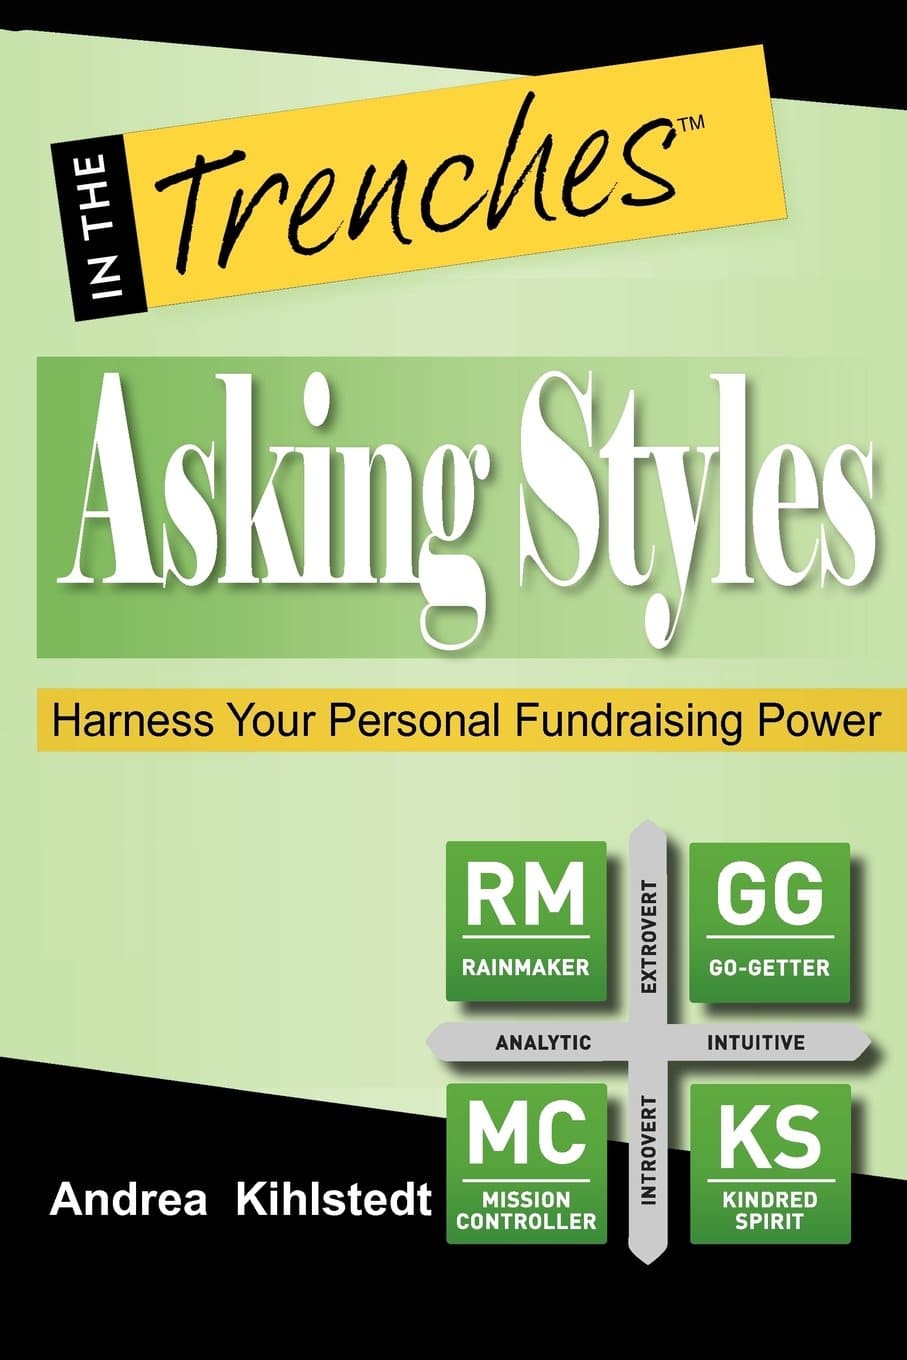 This image is the cover art of the fundraising book Asking Styles: Harness Your Fundraising Power by Andrea Kihlstedt.